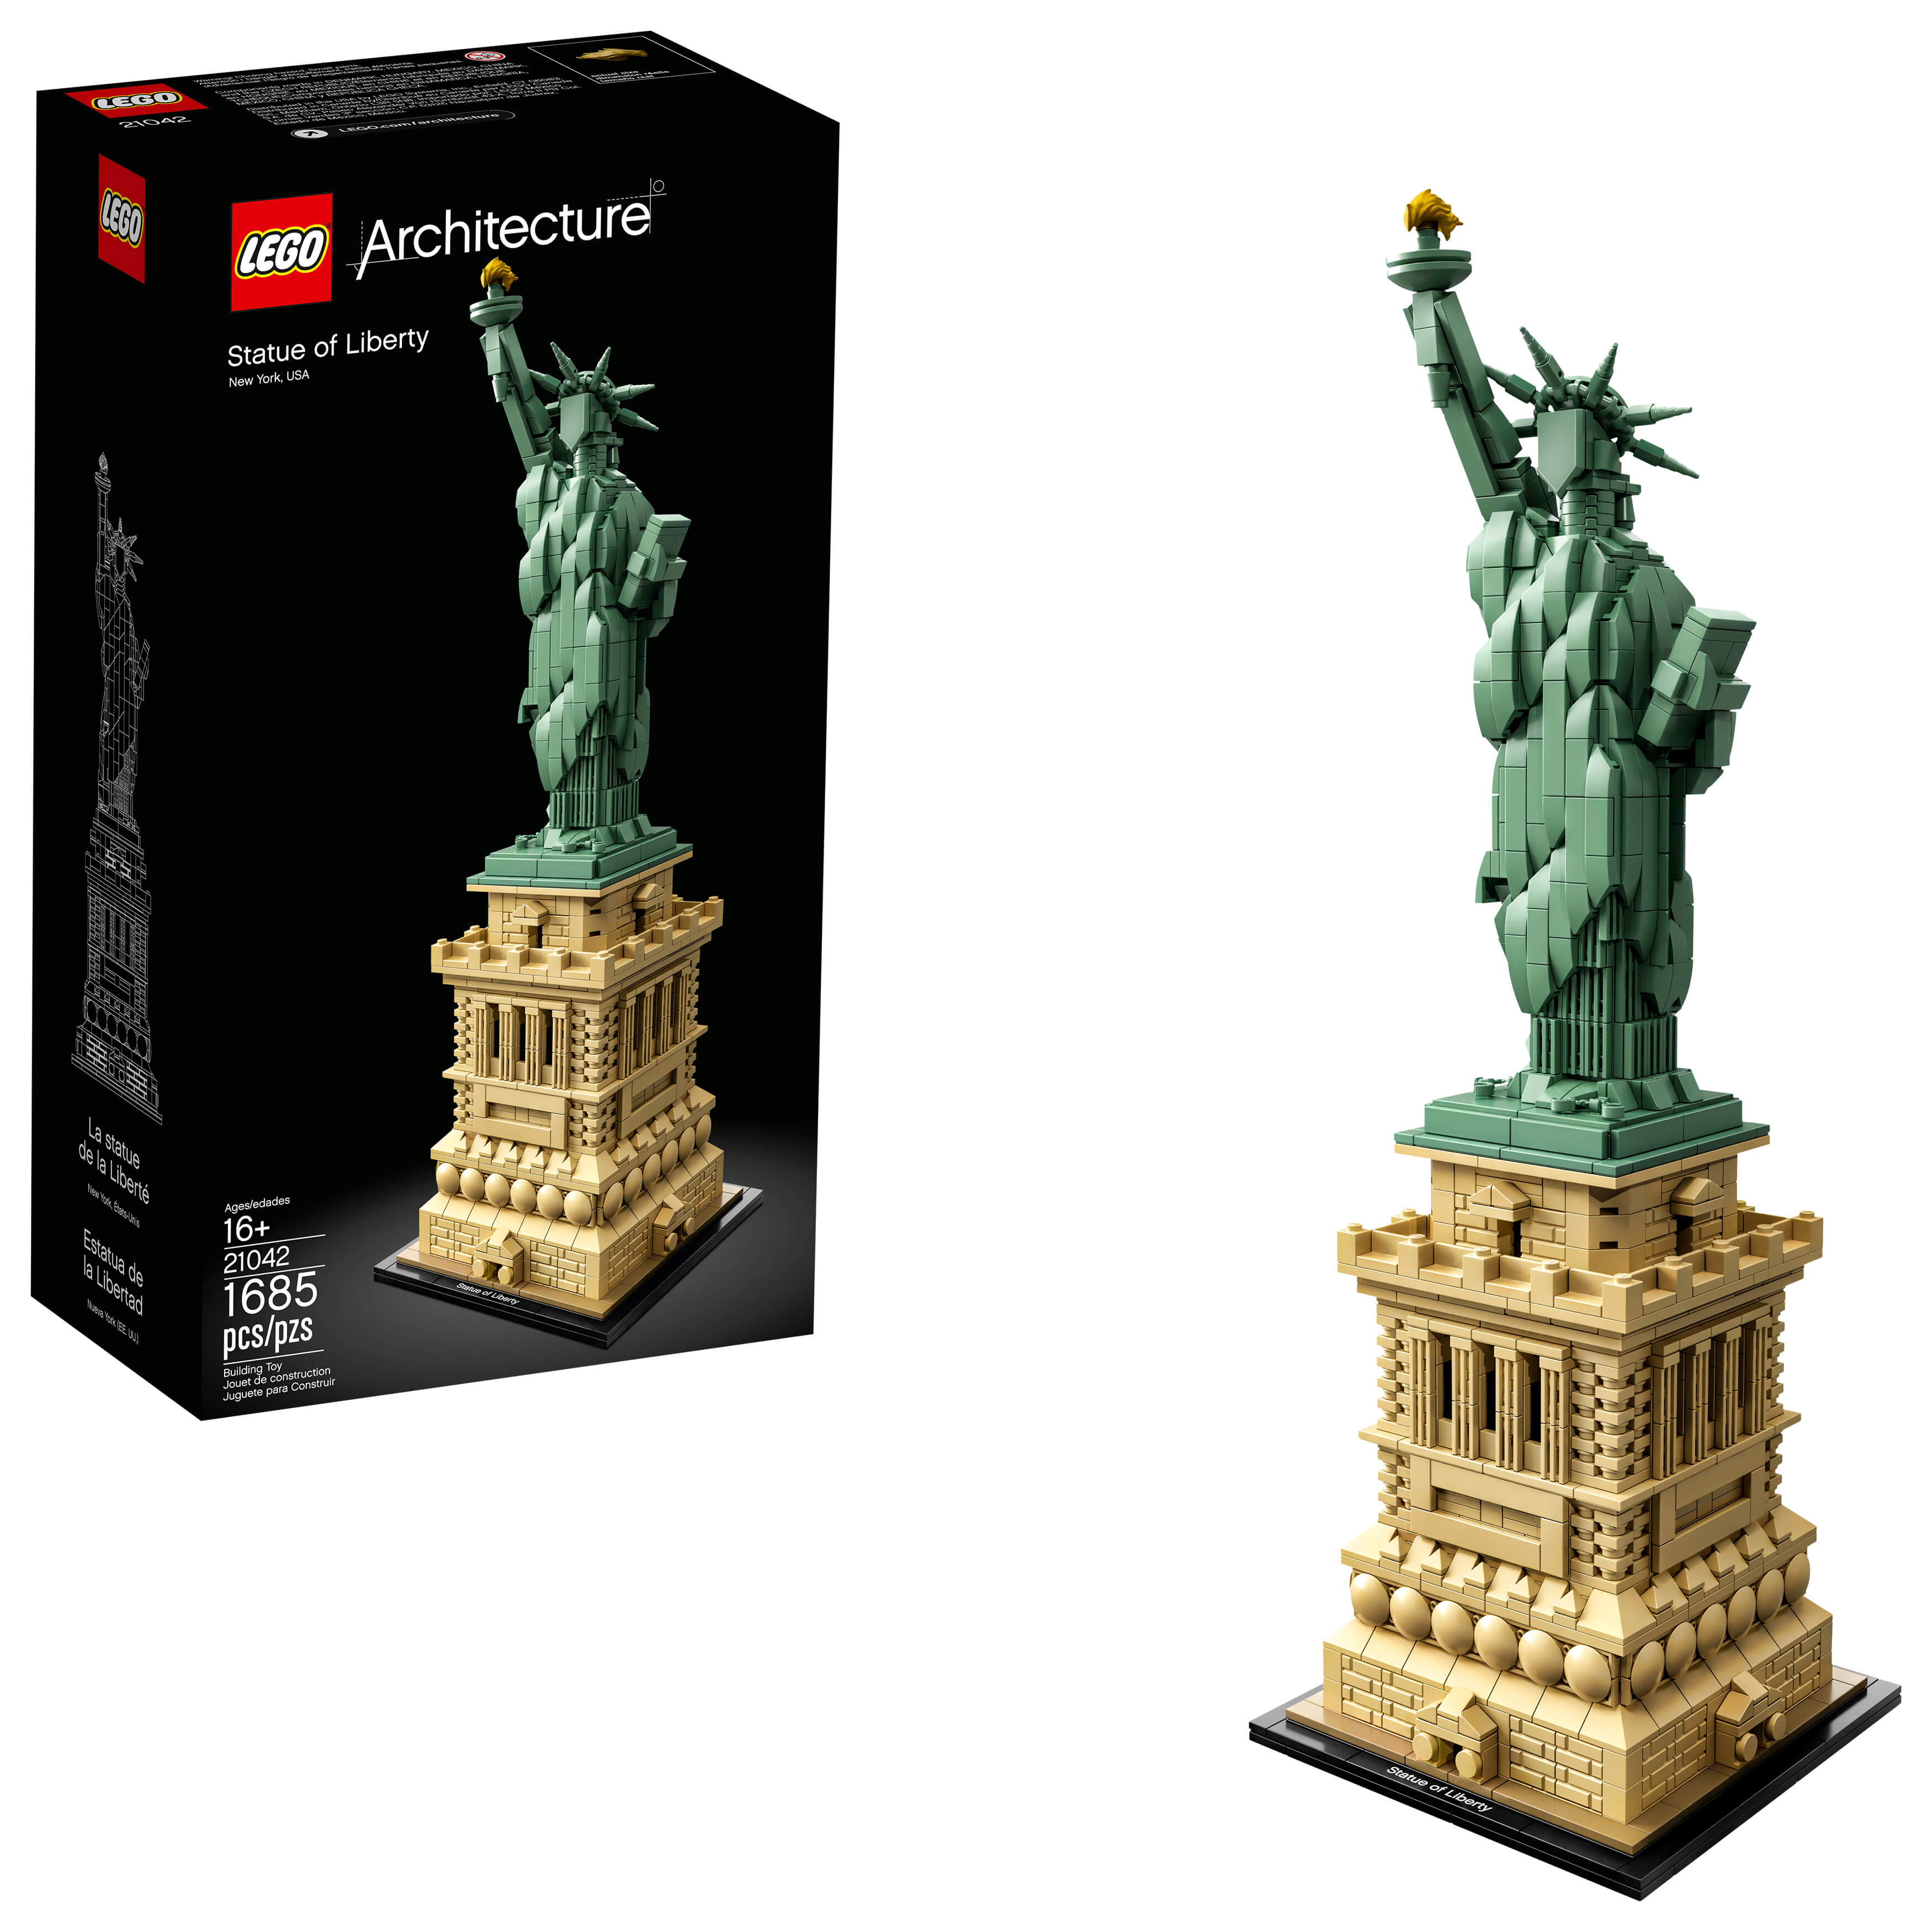 LEGO® Architecture Statue of Liberty 21042 Building Kit (1685 Piece)